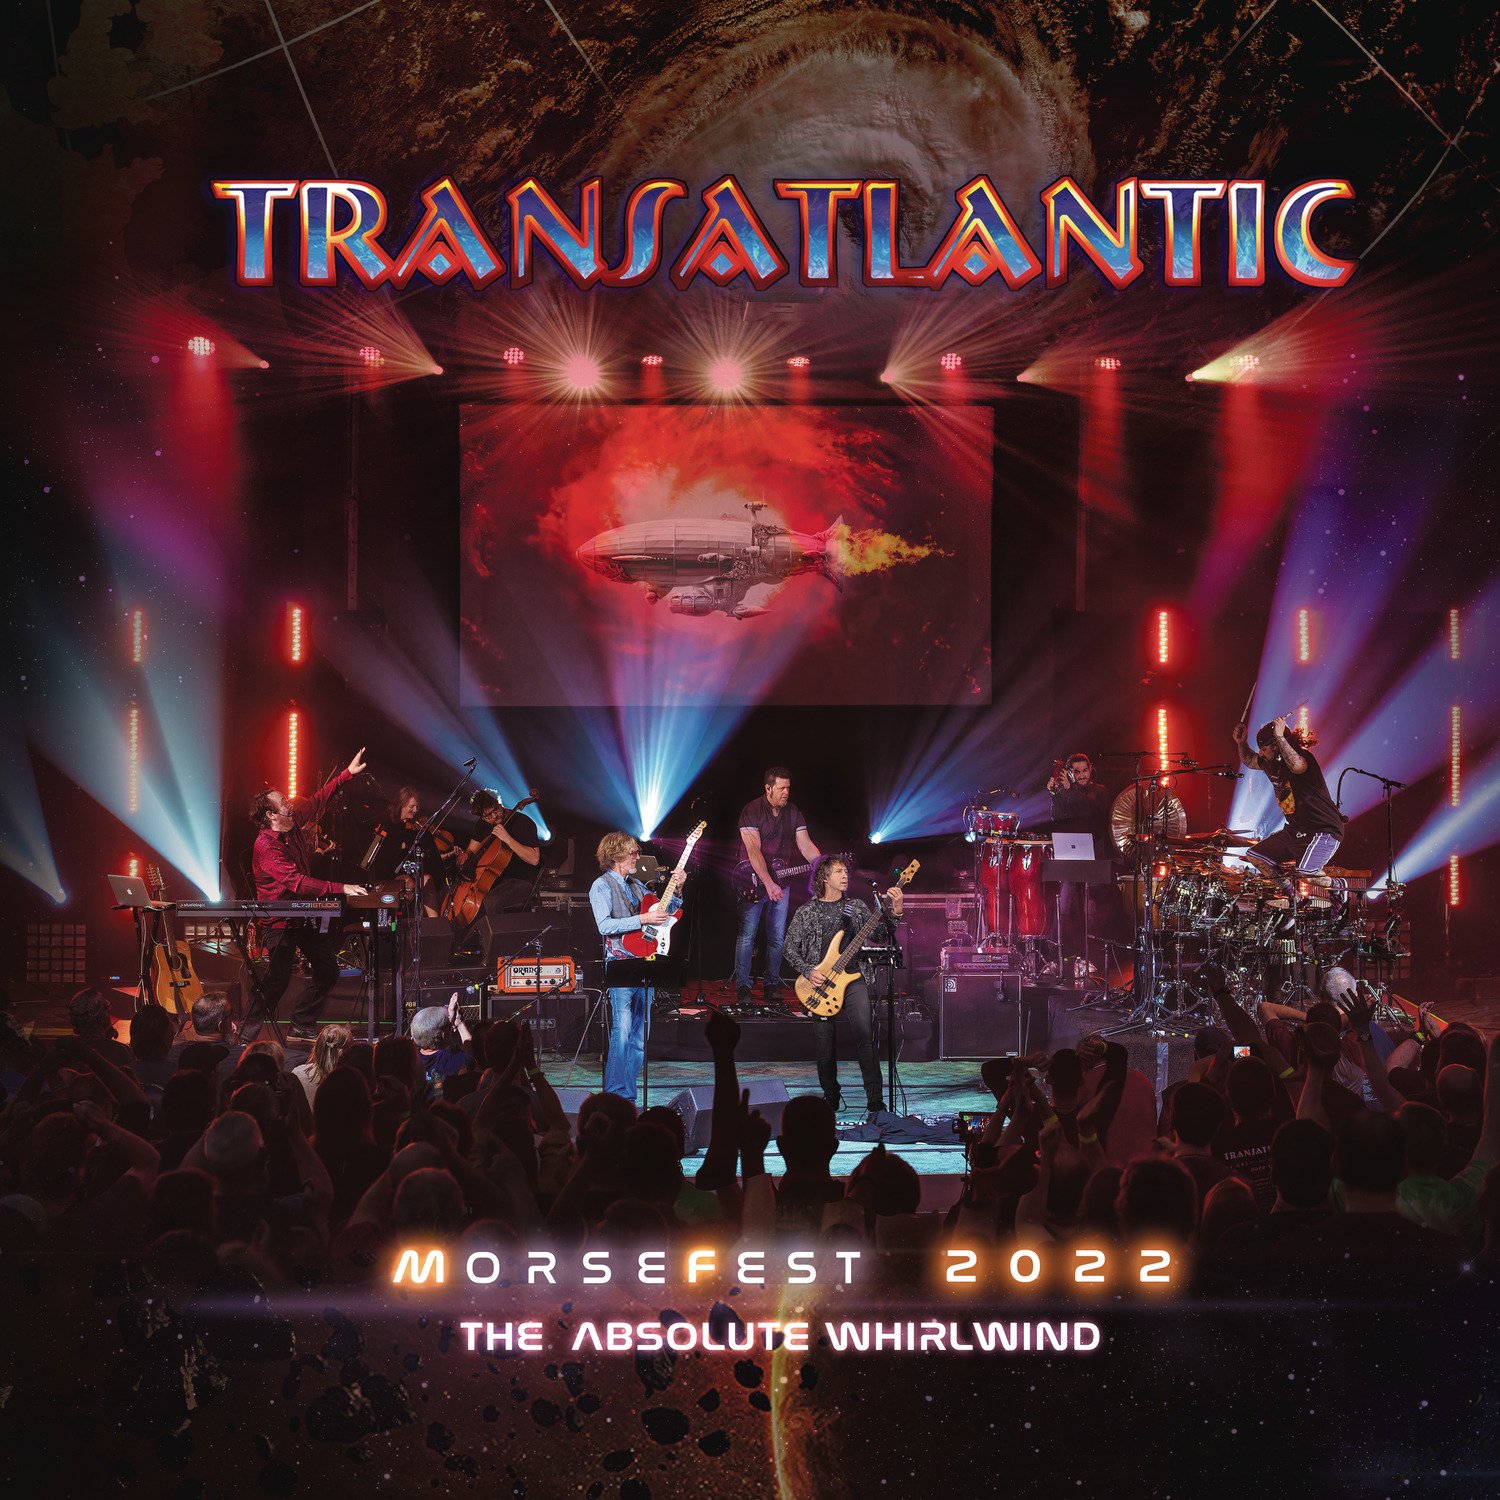 CD Shop - TRANSATLANTIC Live at Morsefest 2022: The Absolute Whirlwind